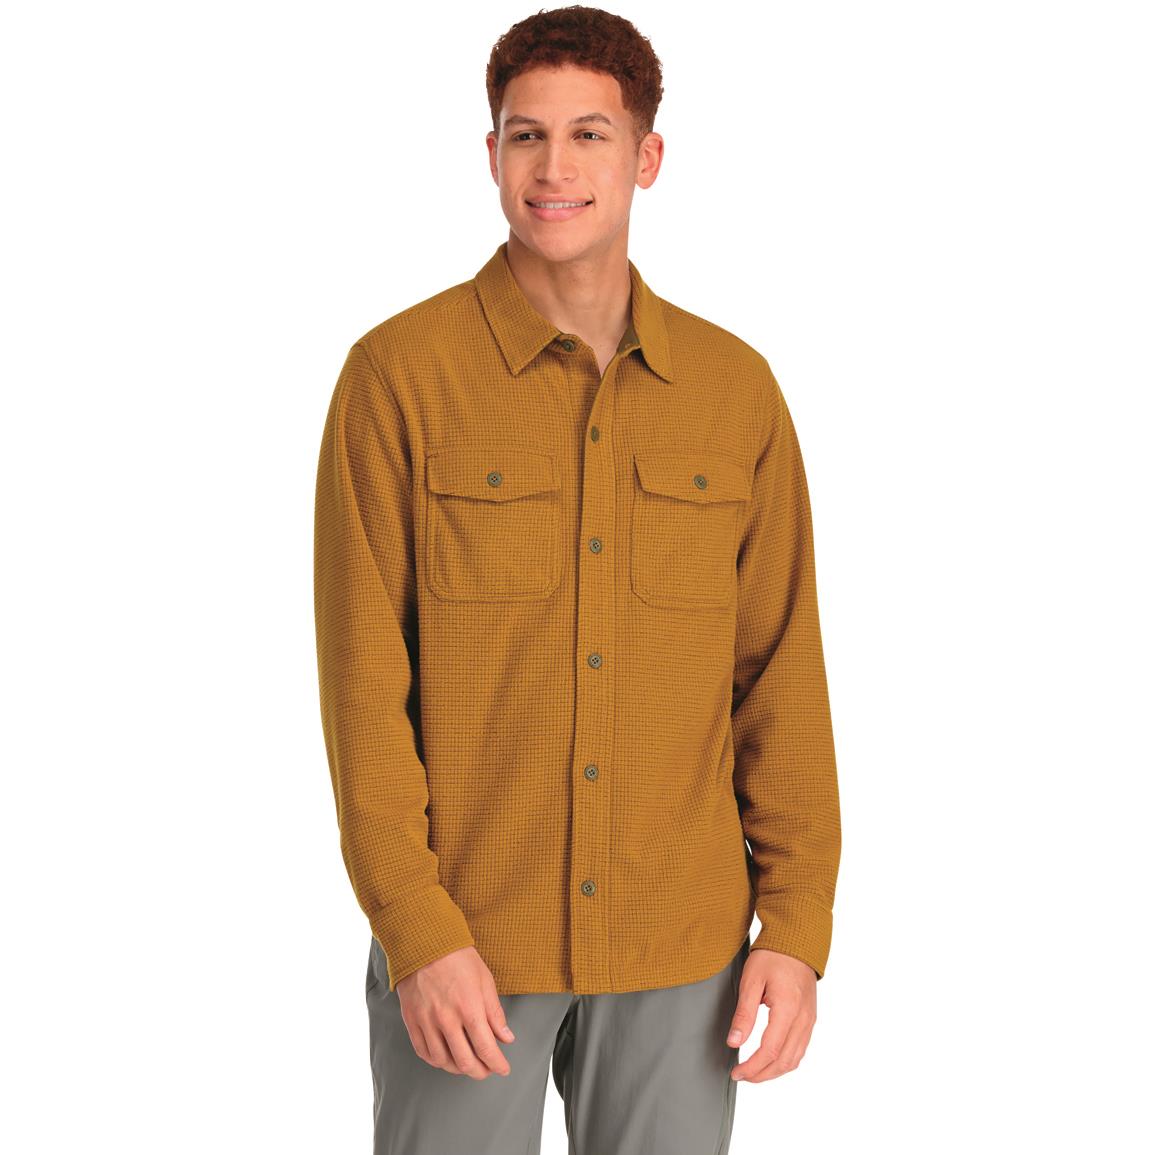 Outdoor Research Men's Trail Mix Shirt Jacket, Tapenade